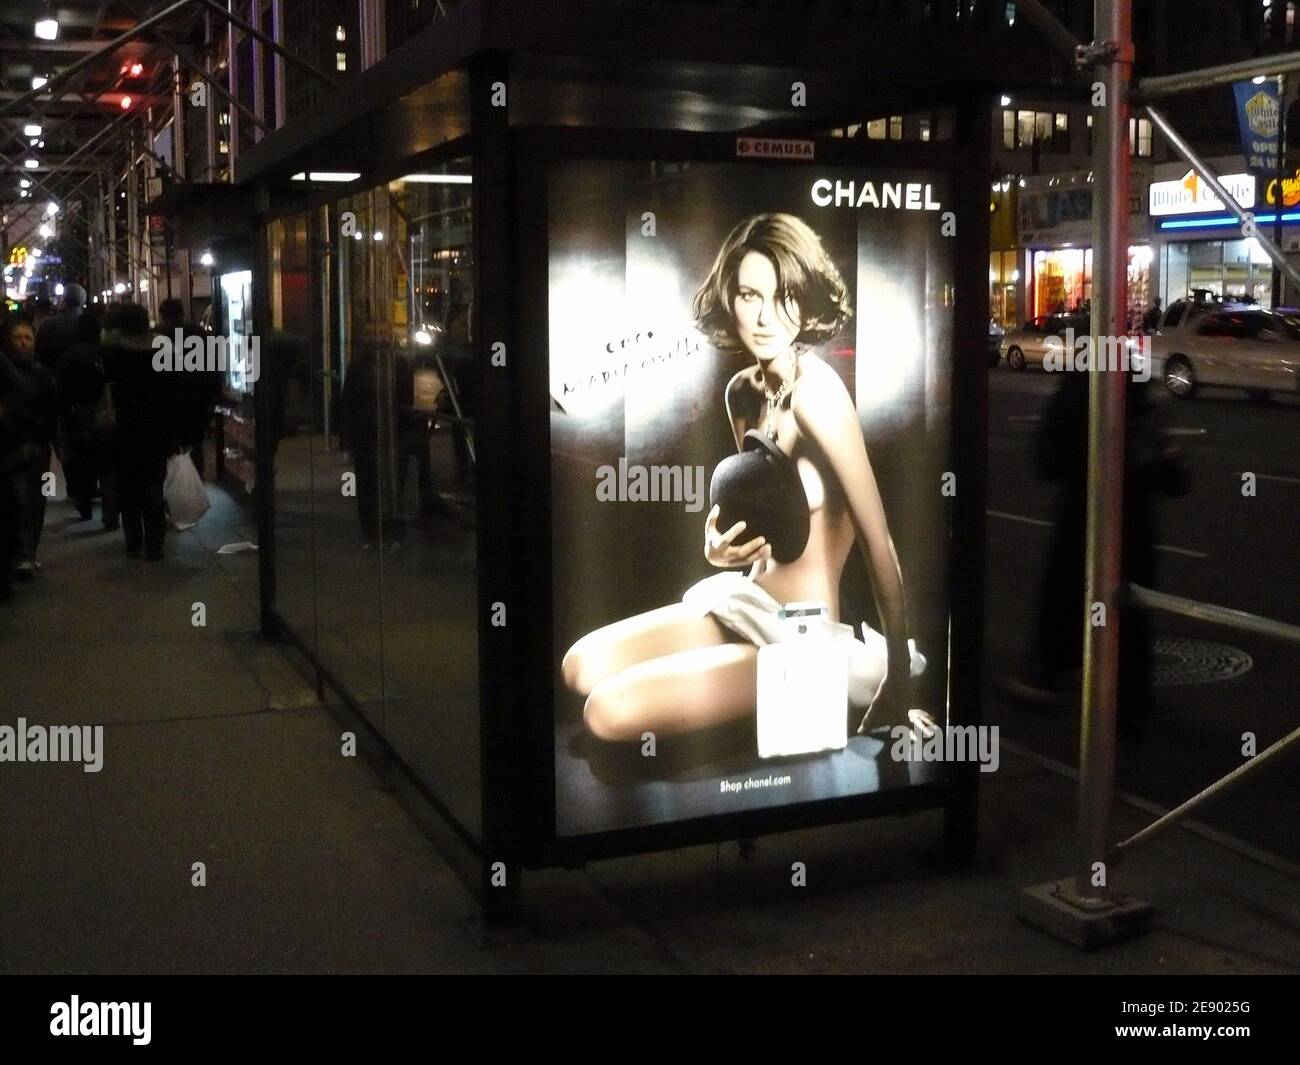 British actress Keira Knightley is seen in an advertising campaign for the  new Chanel fragrance 'Coco Mademoiselle' on a bus stop in New York City,  NY, USA on November 6, 2007. Replacing